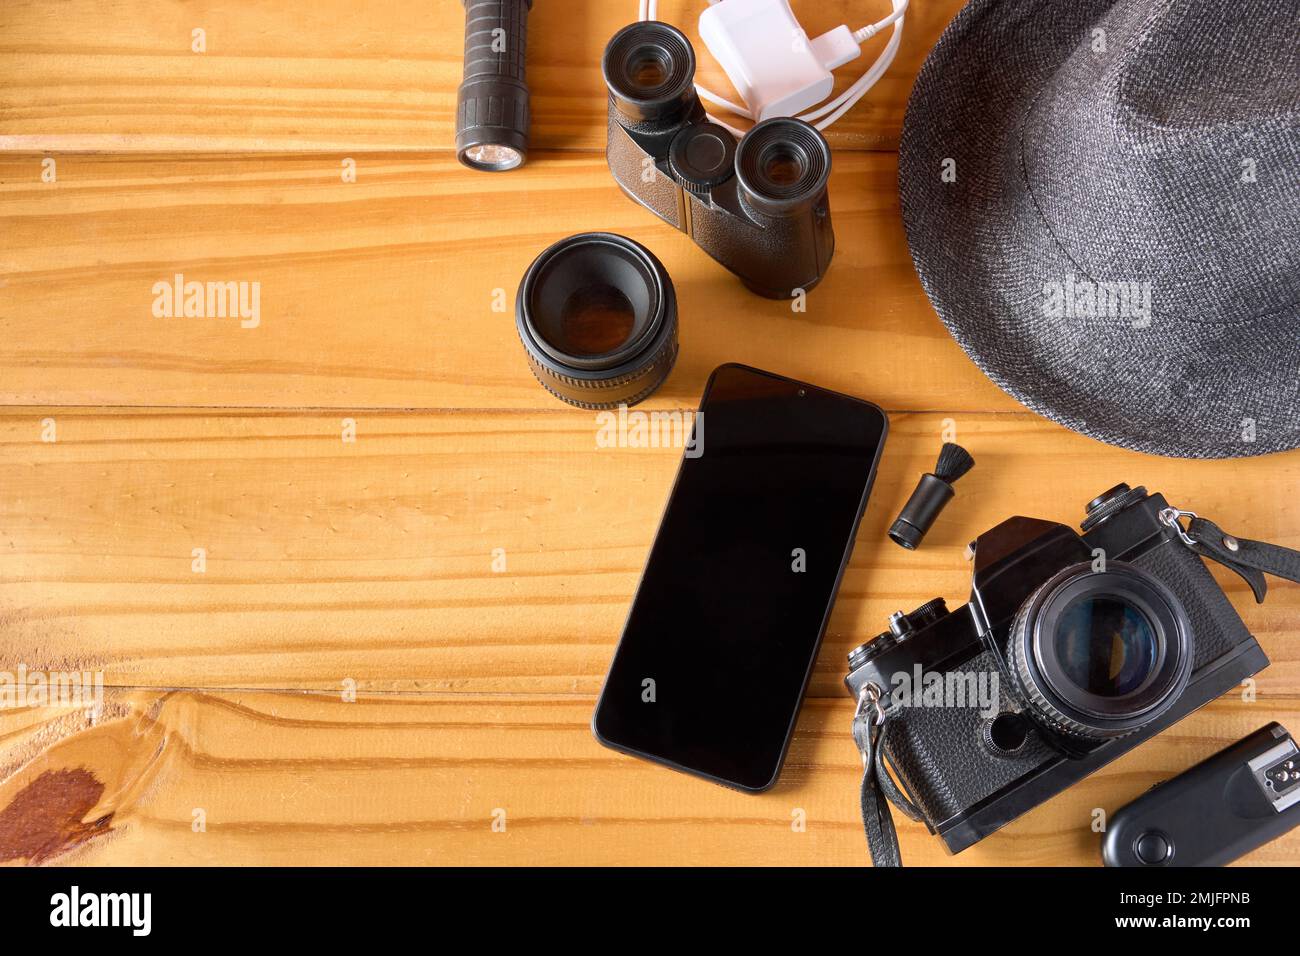 Top view of travel accessories on wooden table with mobile phone, camera and lens, hat, binoculars, flashlight, charger, cleaning brush and transmitte Stock Photo